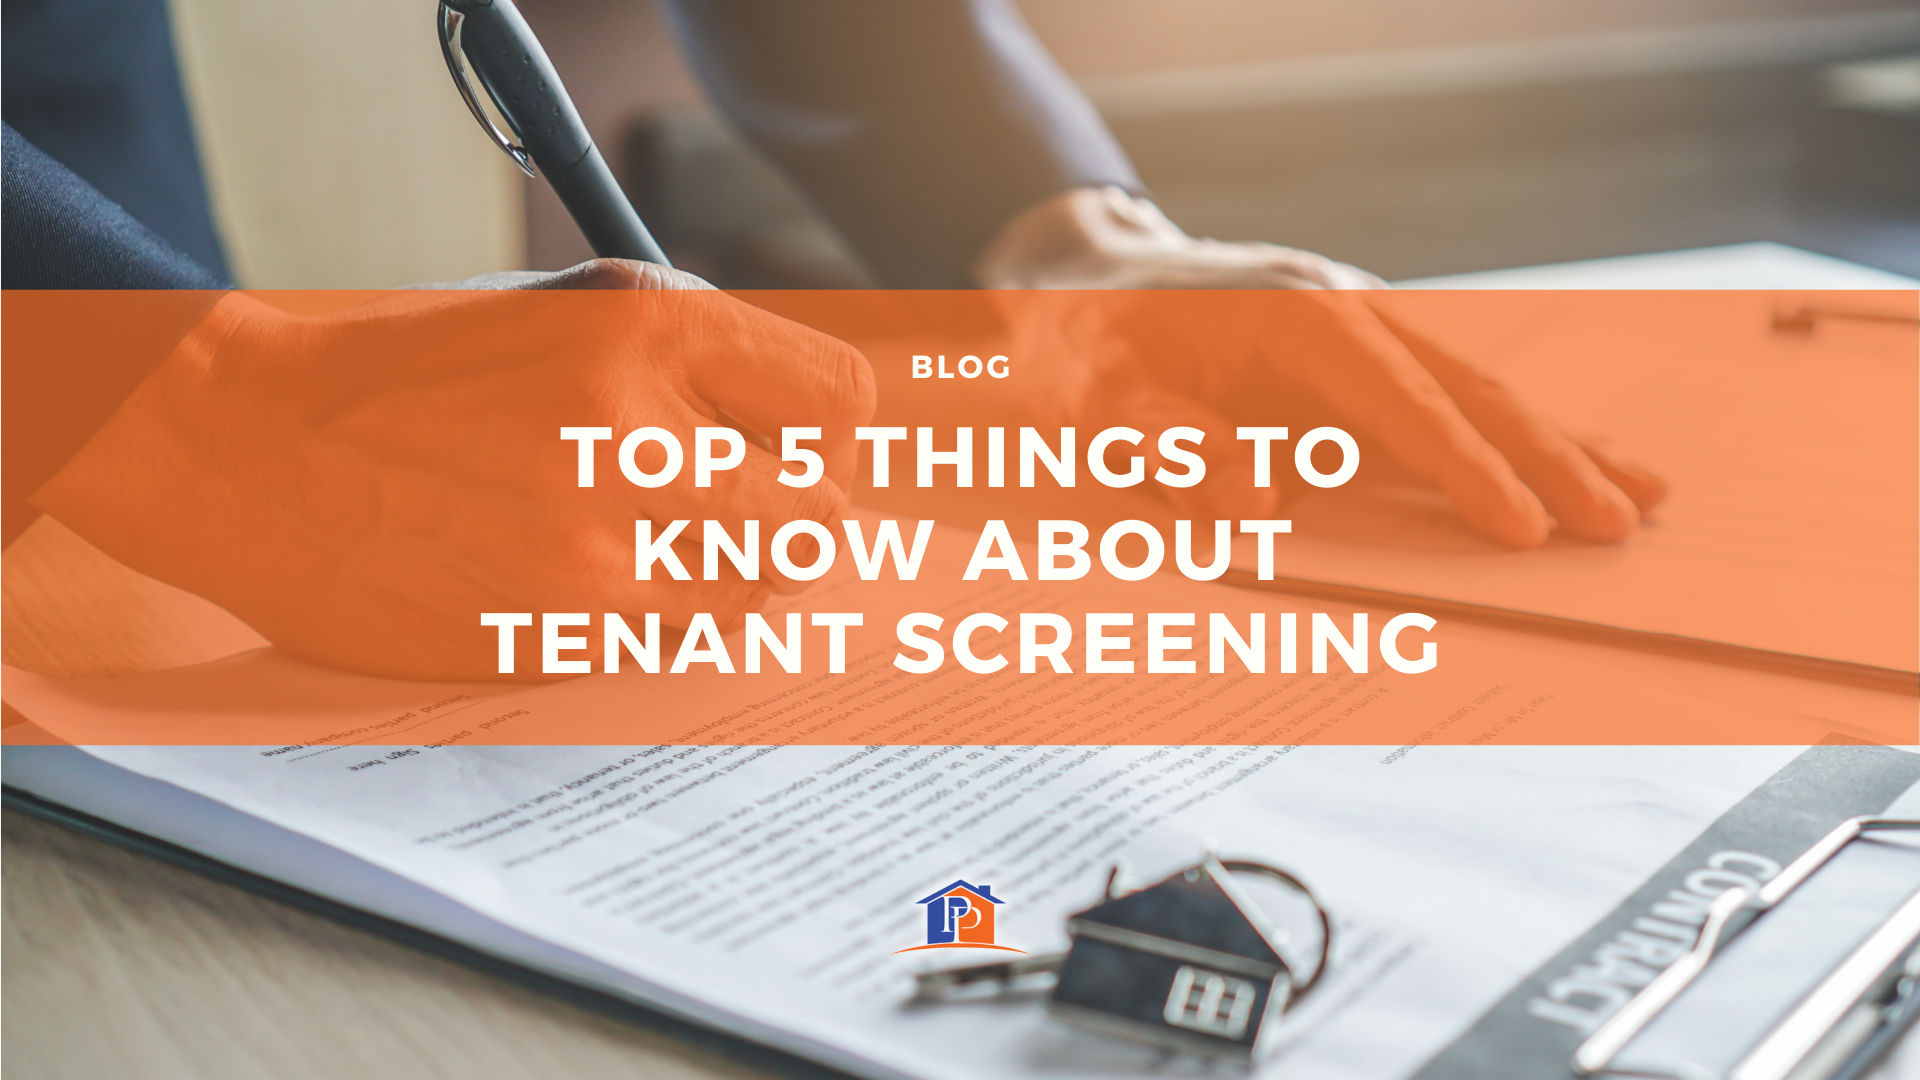 Top 5 Things to Know About Tenant Screening